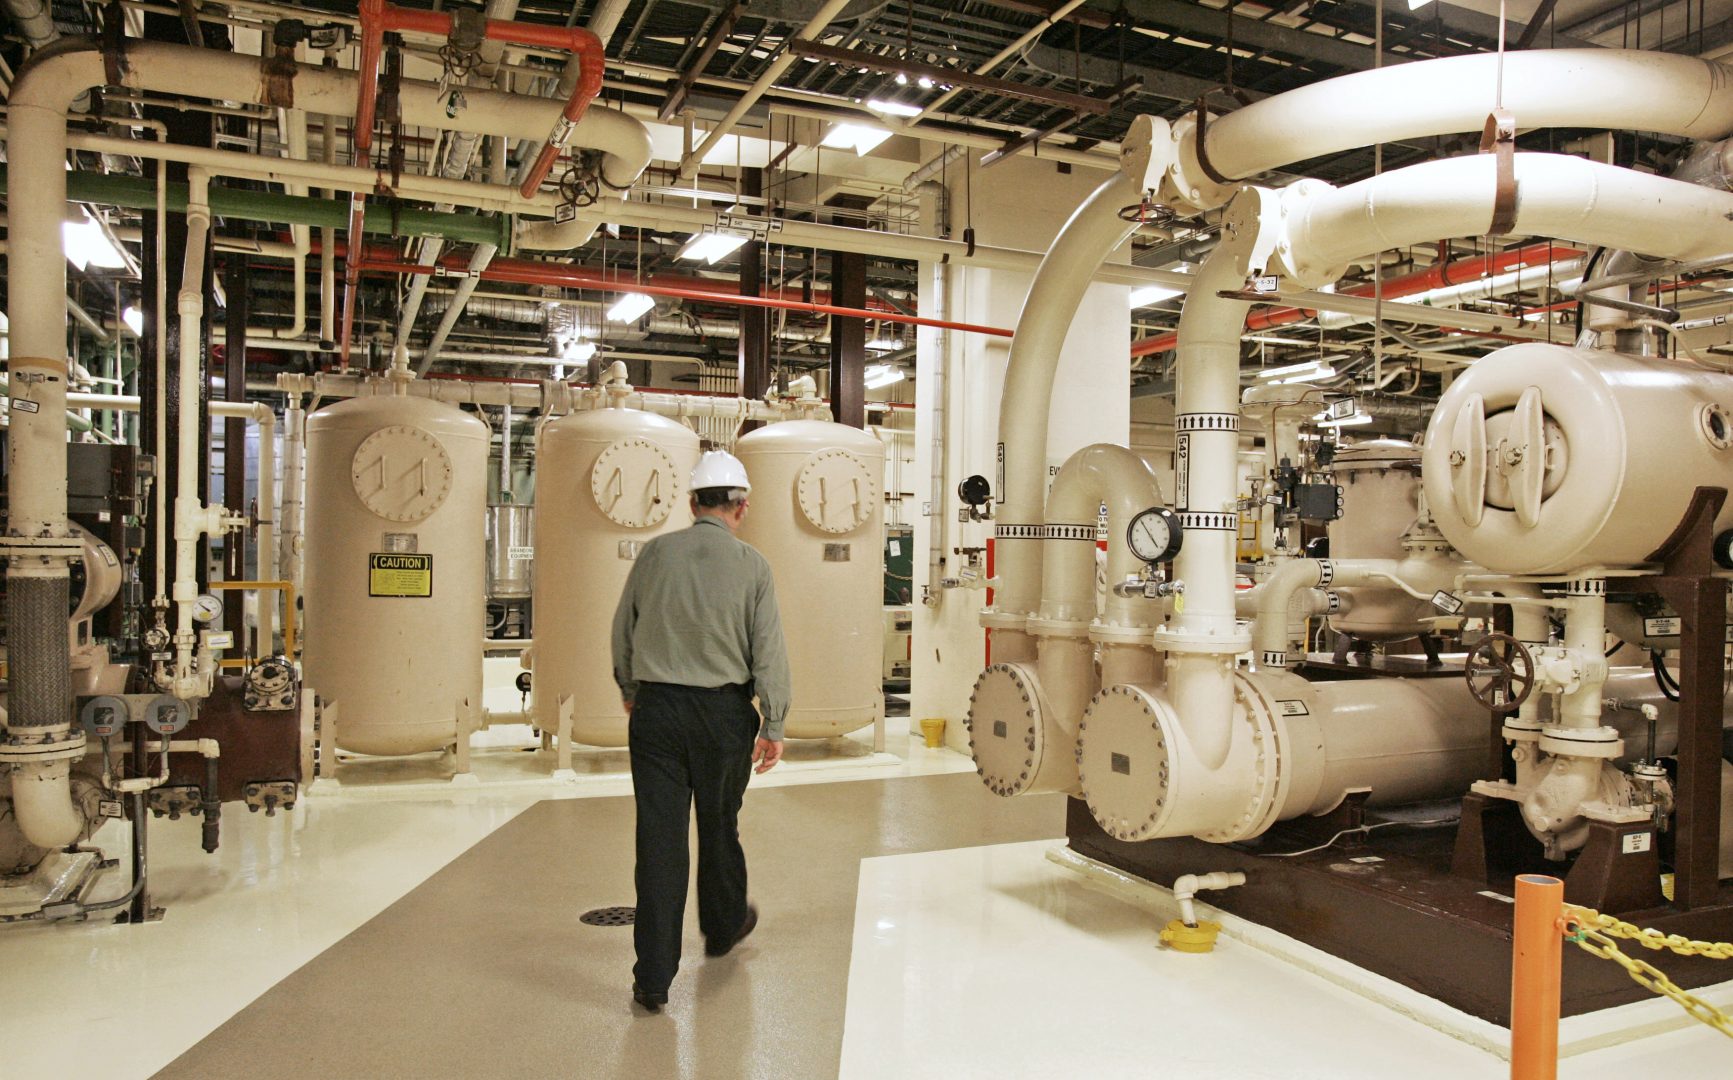 In this Feb. 25, 2010, file photo, an Exelon Corp. employee walks past equipment in the turbine building at the Oyster Creek Generating Station, a nuclear power plant in Lacey Township, N.J. Shutting down the site of the nation's oldest nuclear power plant will take 60 years and cost $1.4 billion, according to a plan filed May 21, 2018, by a subsidiary of Chicago-based Exelon Corp. and under review by the Nuclear Regulatory Commission. 